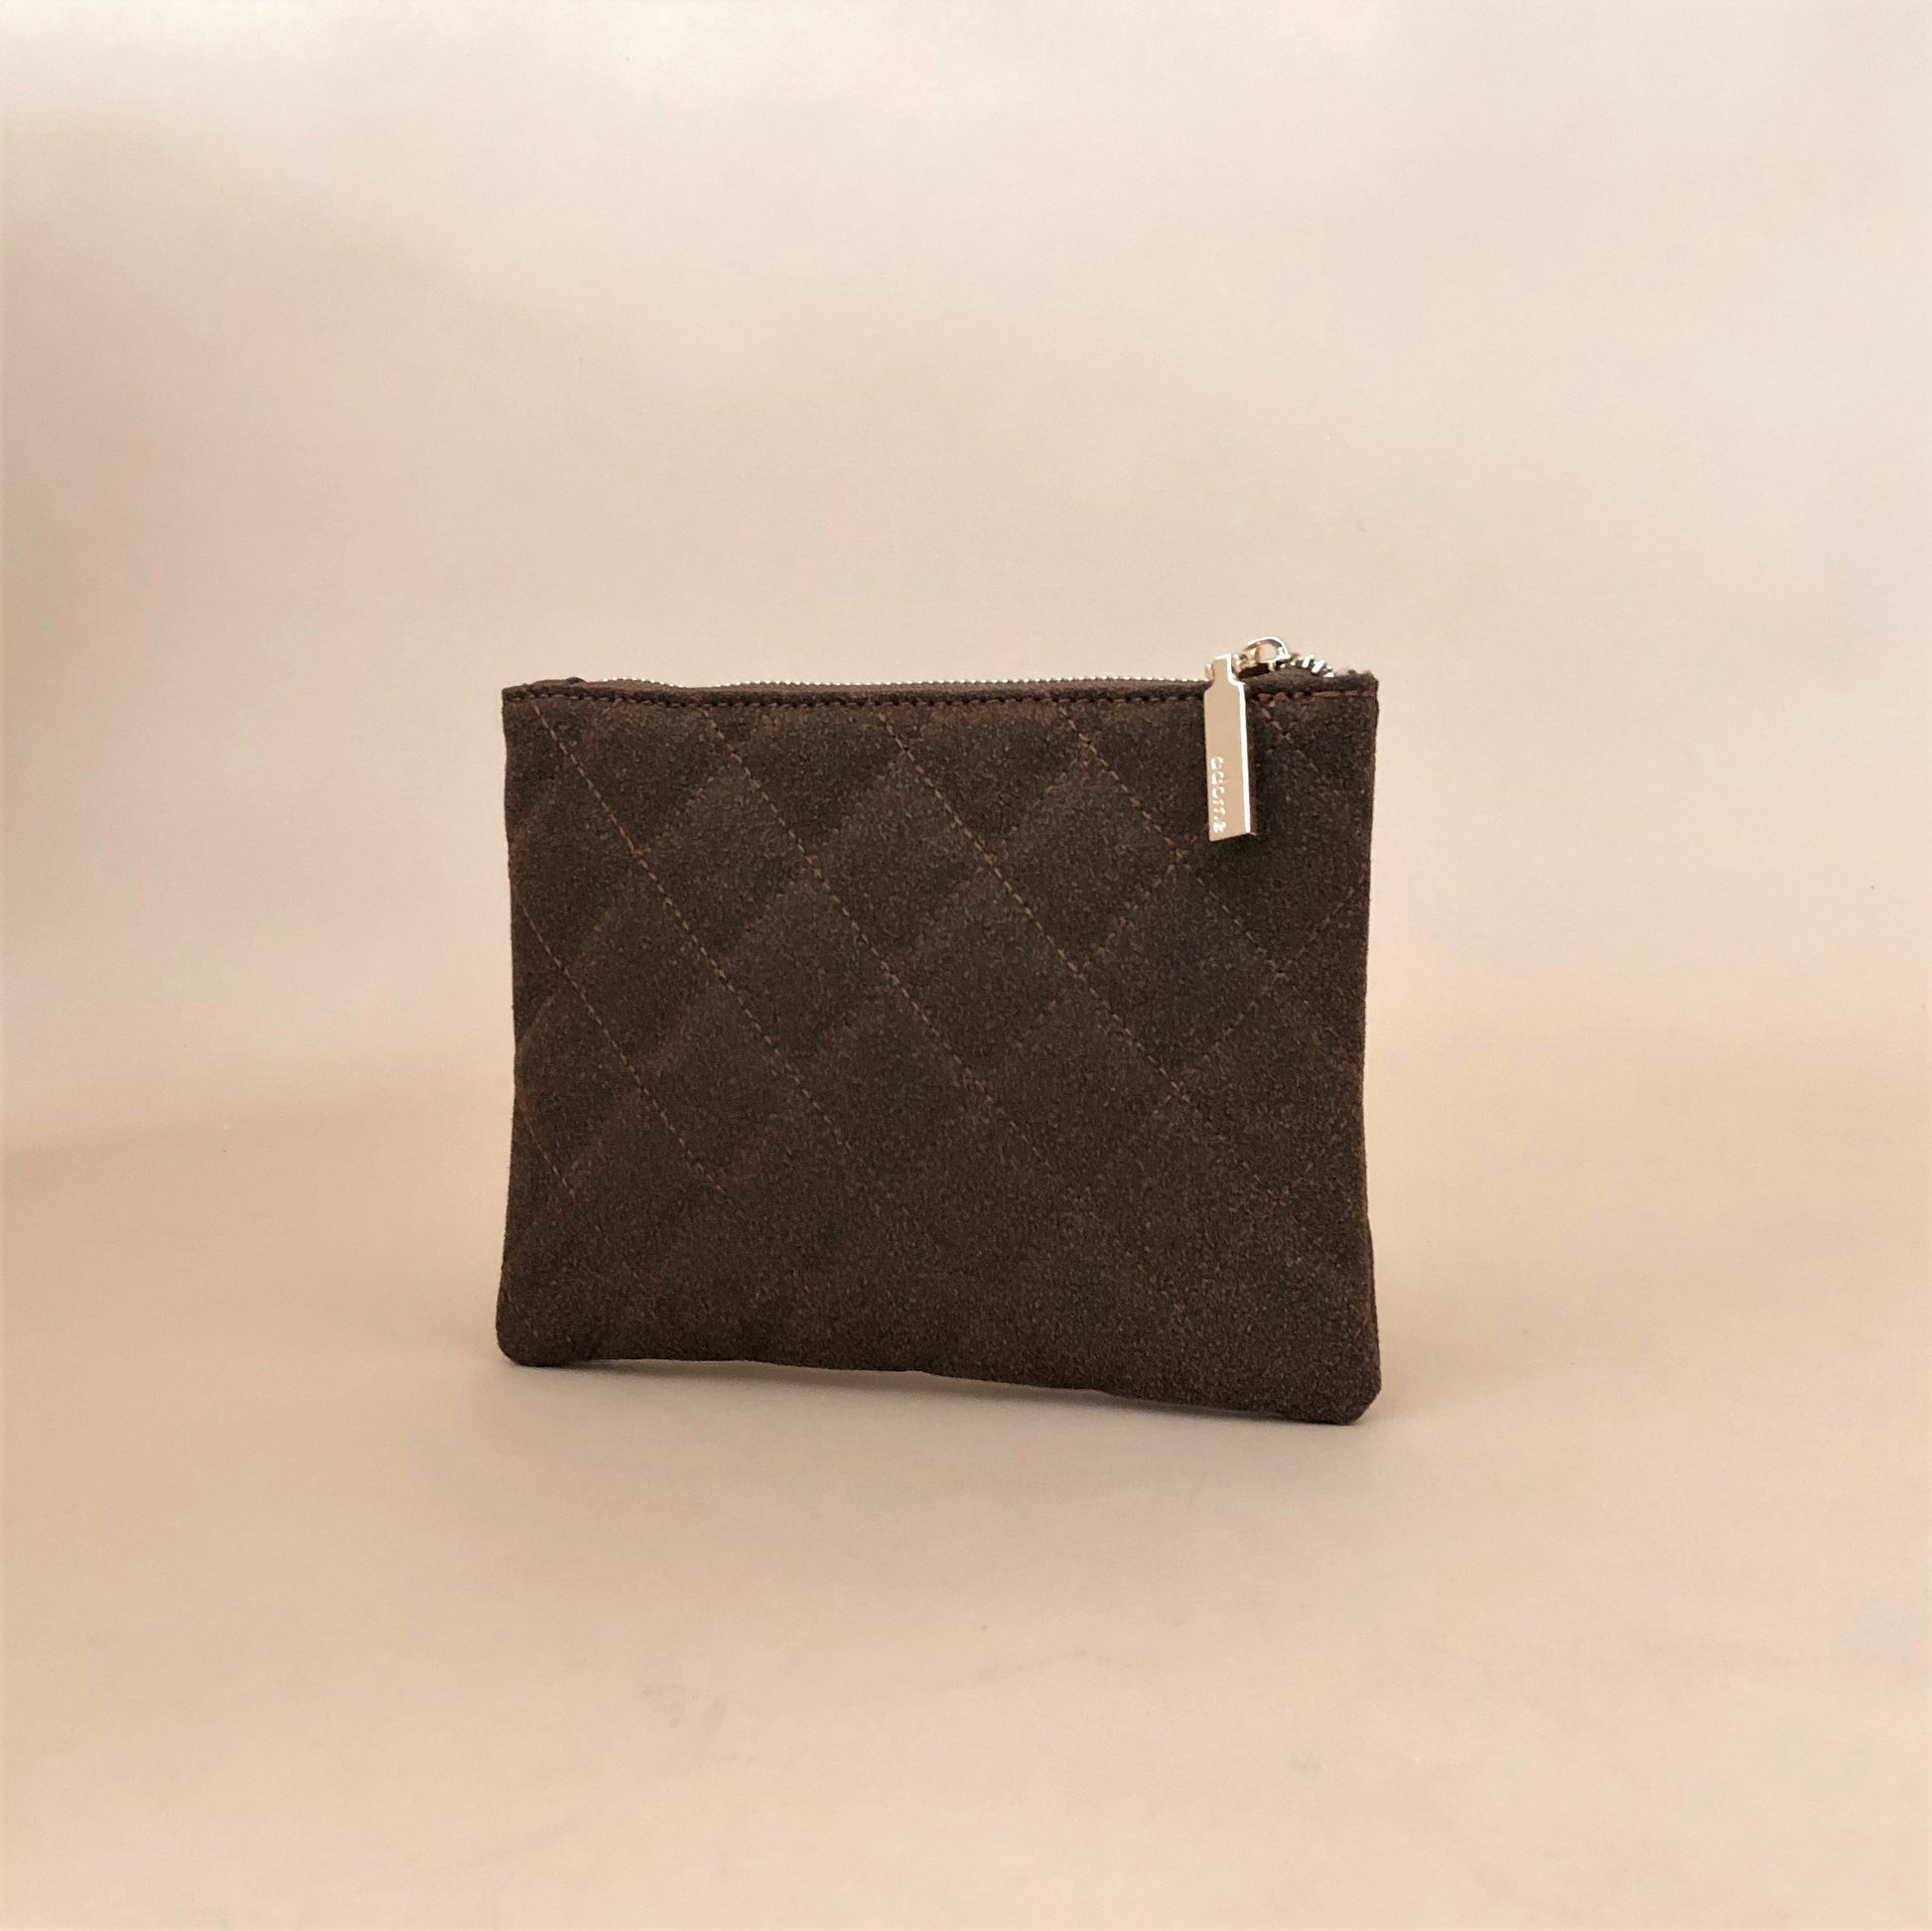 Vegan Suede quilted zip up Pouch bag in Chocolate - sammi